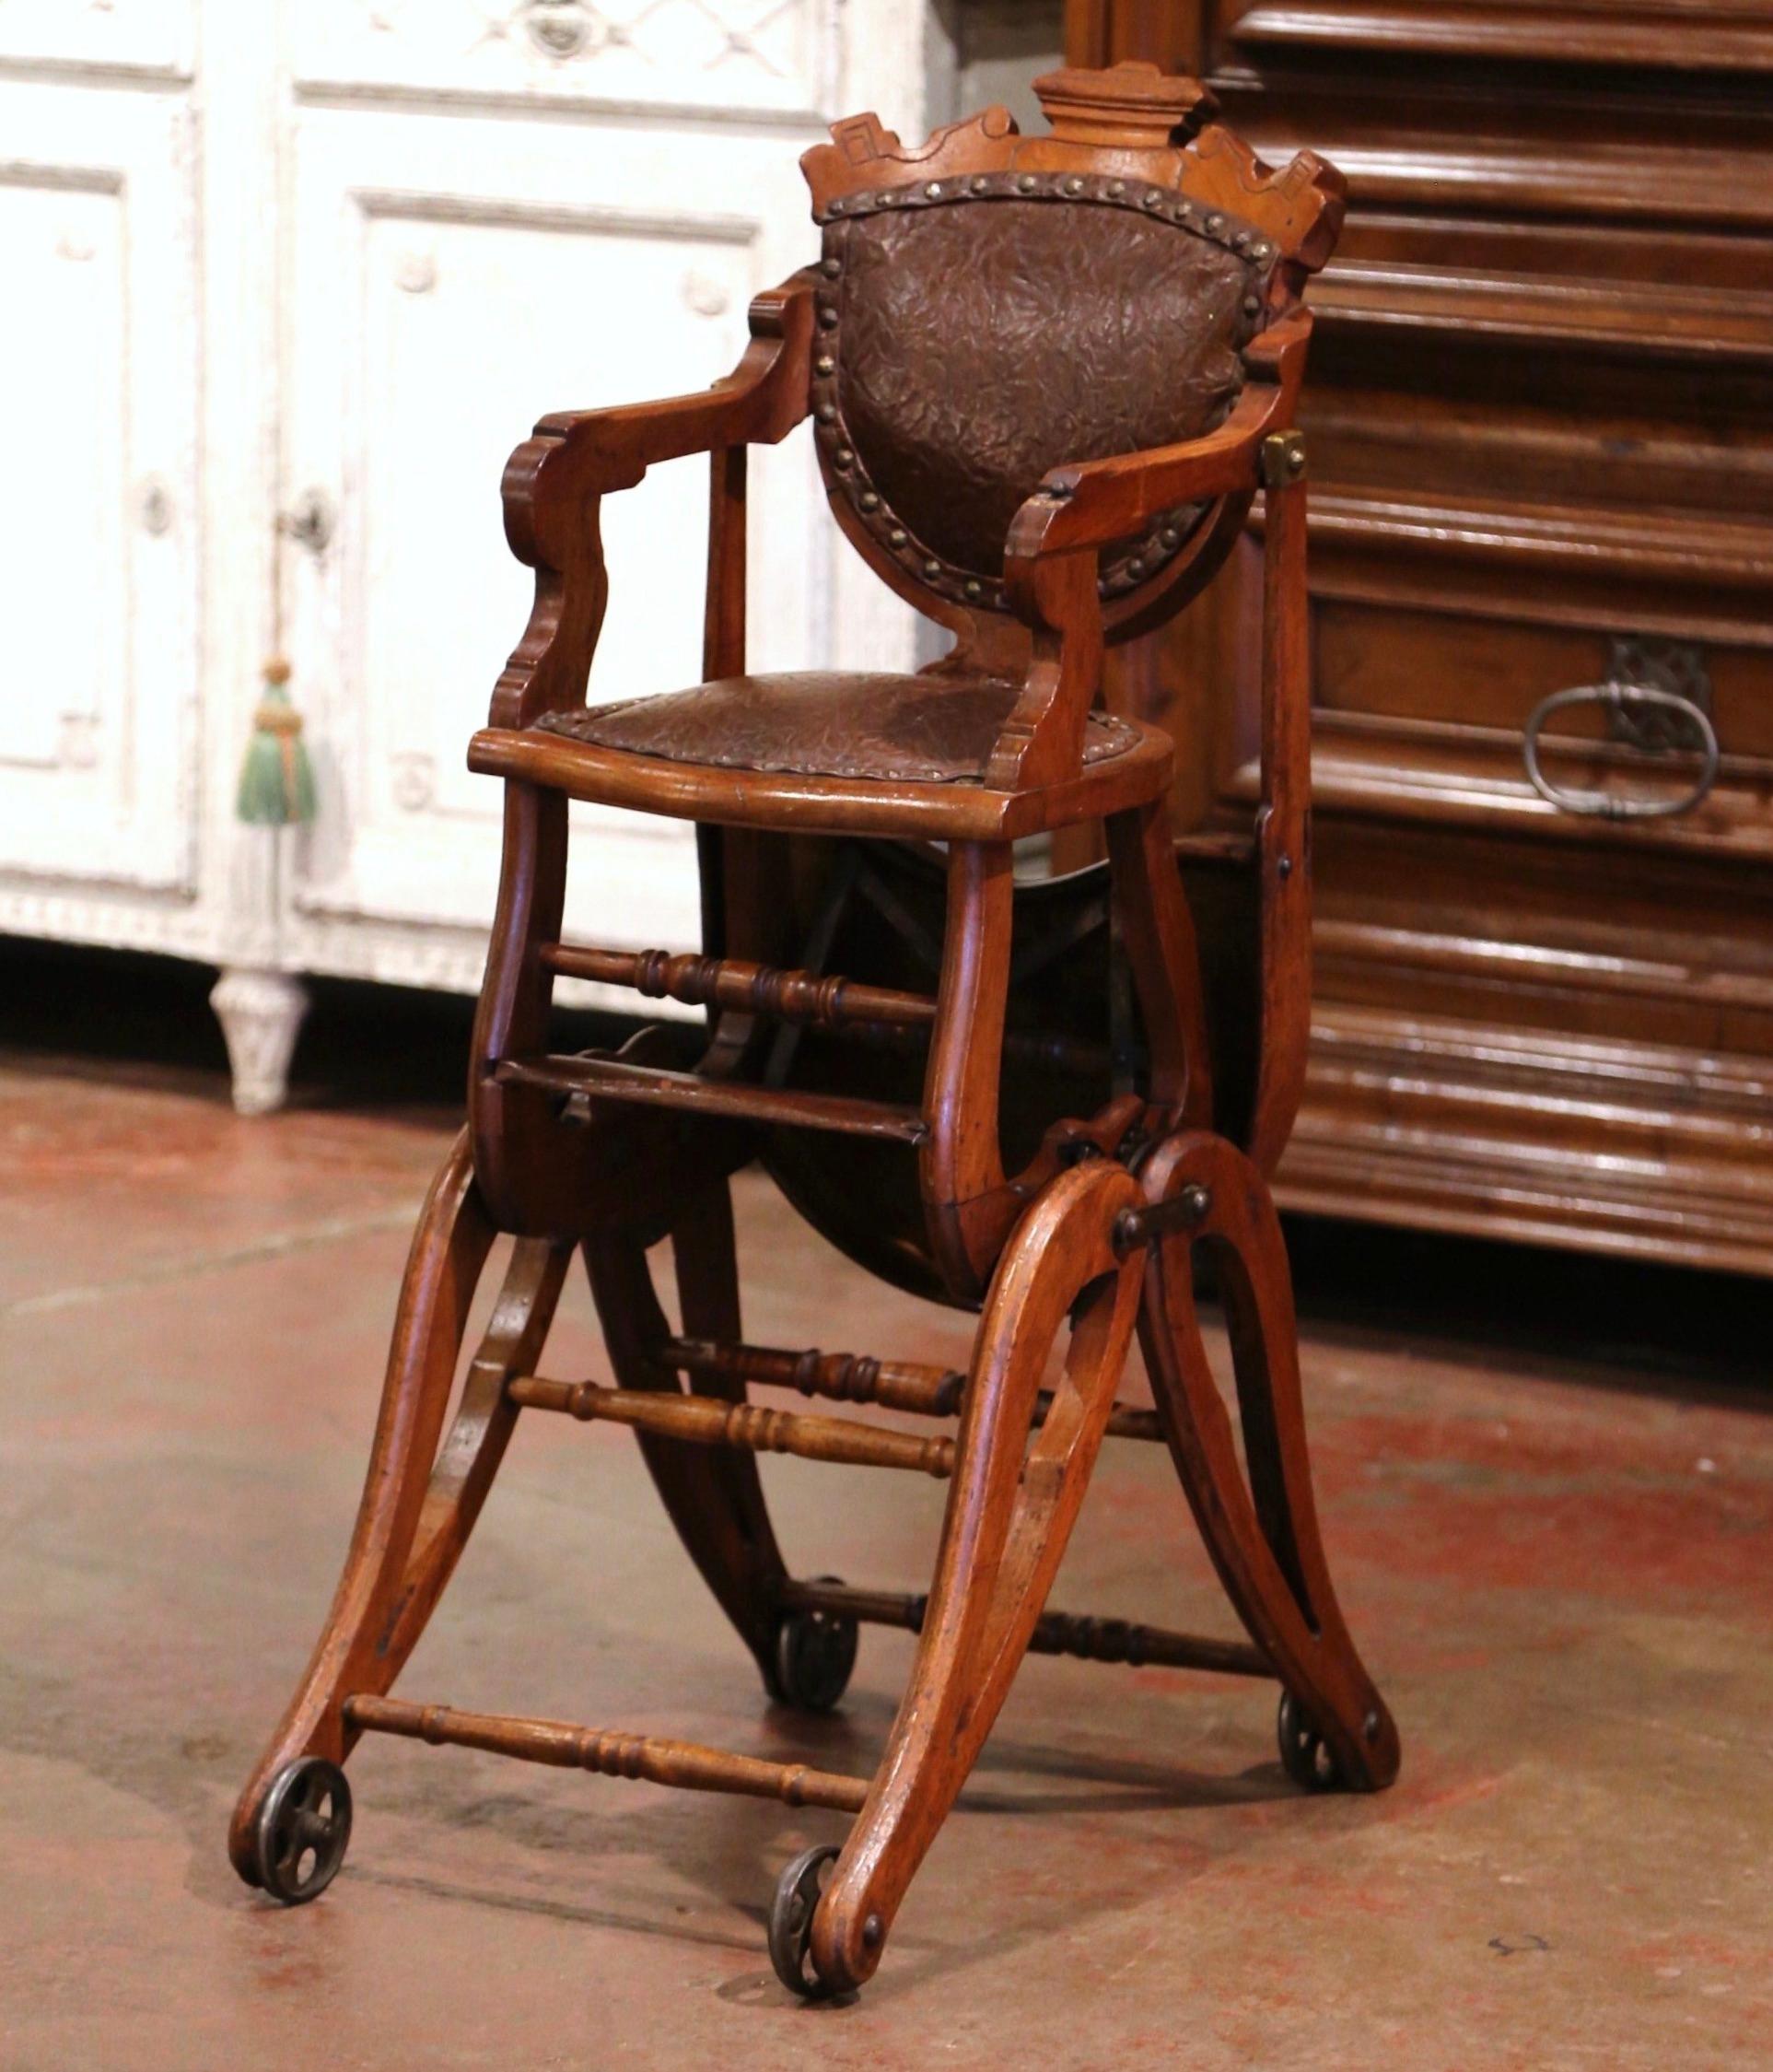 Victorian 19th Century English Carved Walnut and Leather Adjustable High Chair Rocker